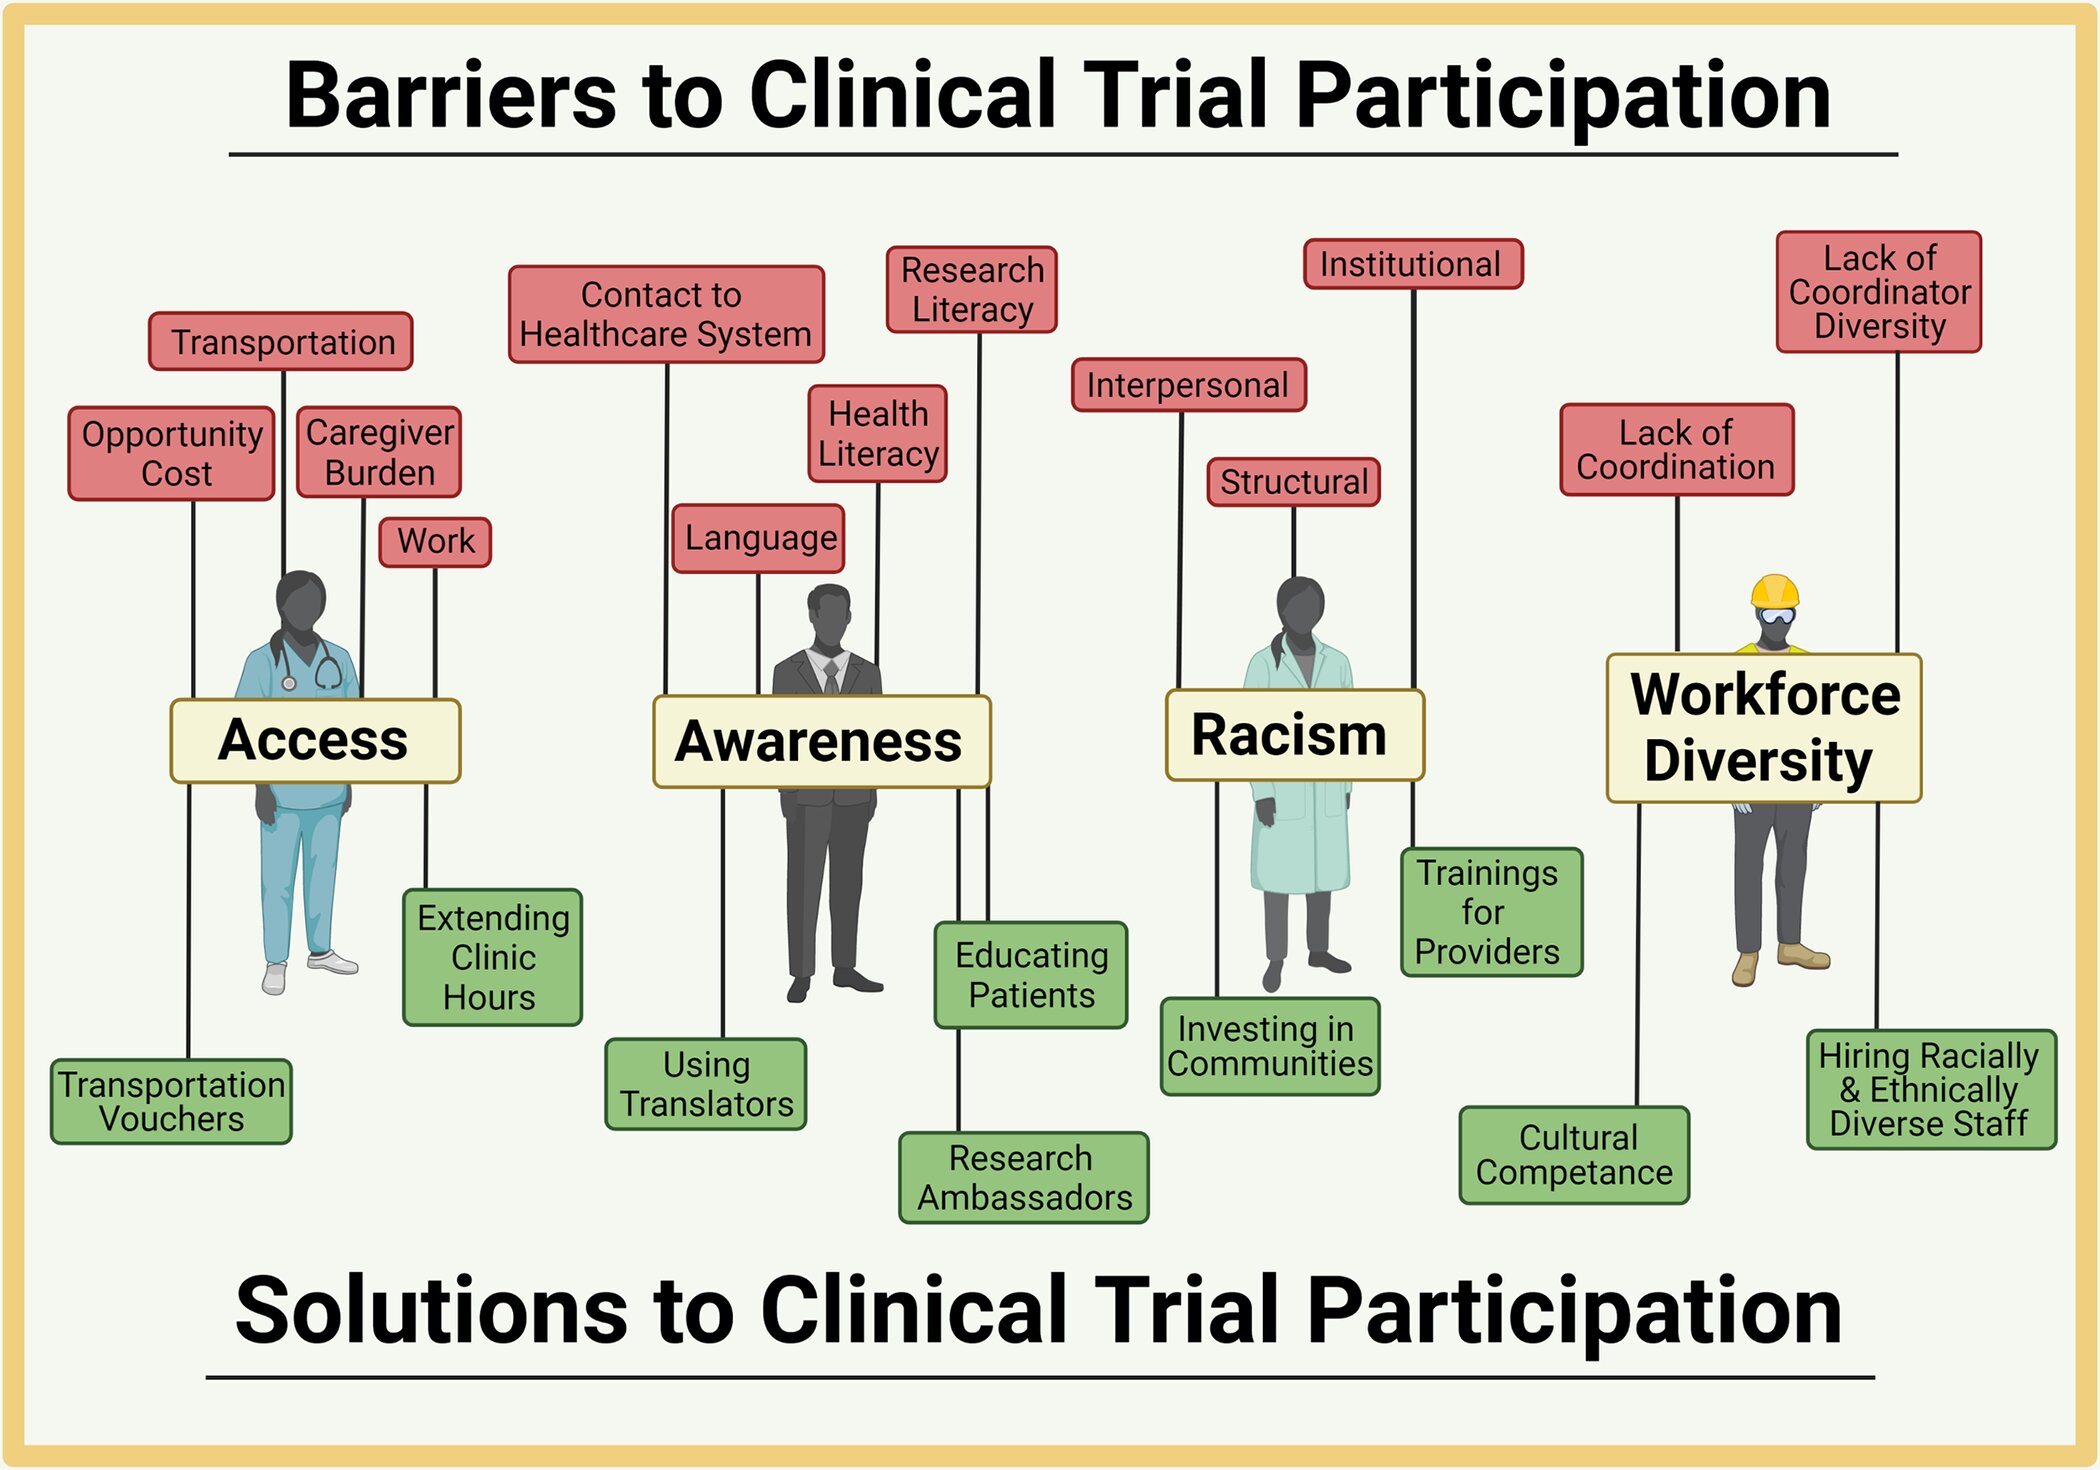 #Study explores how community engagement can help improve clinical trial diversity